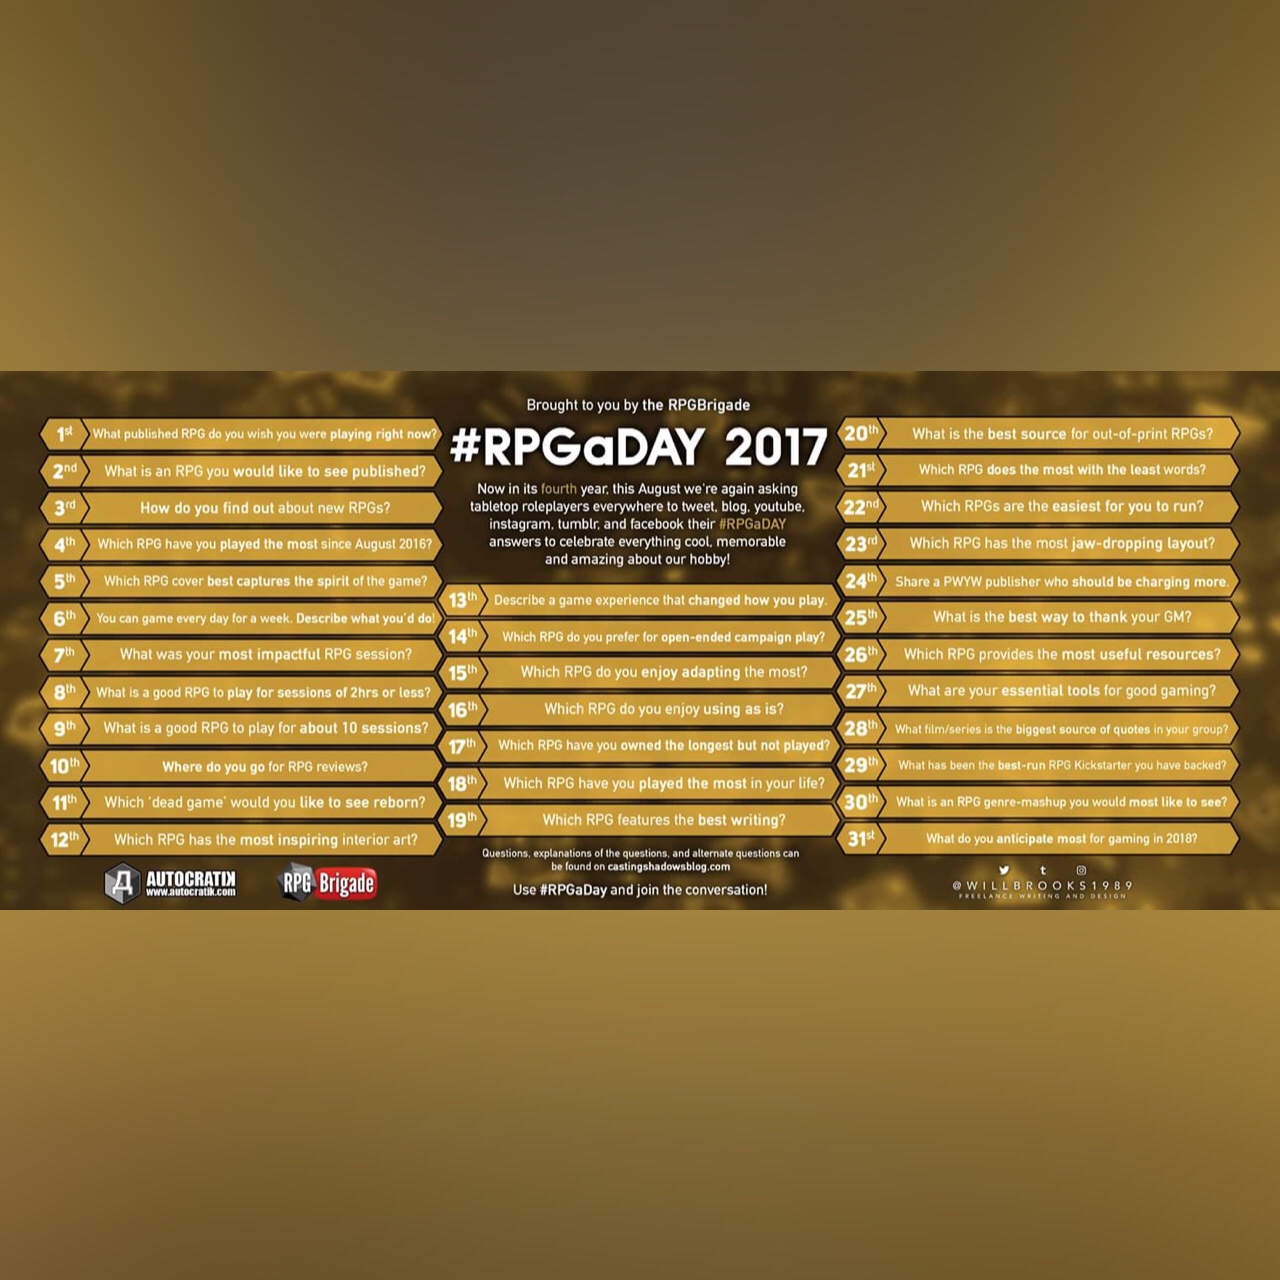 RPGaDAY 2017 August 23rd Which RPG has the most Jaw-dropping layout?